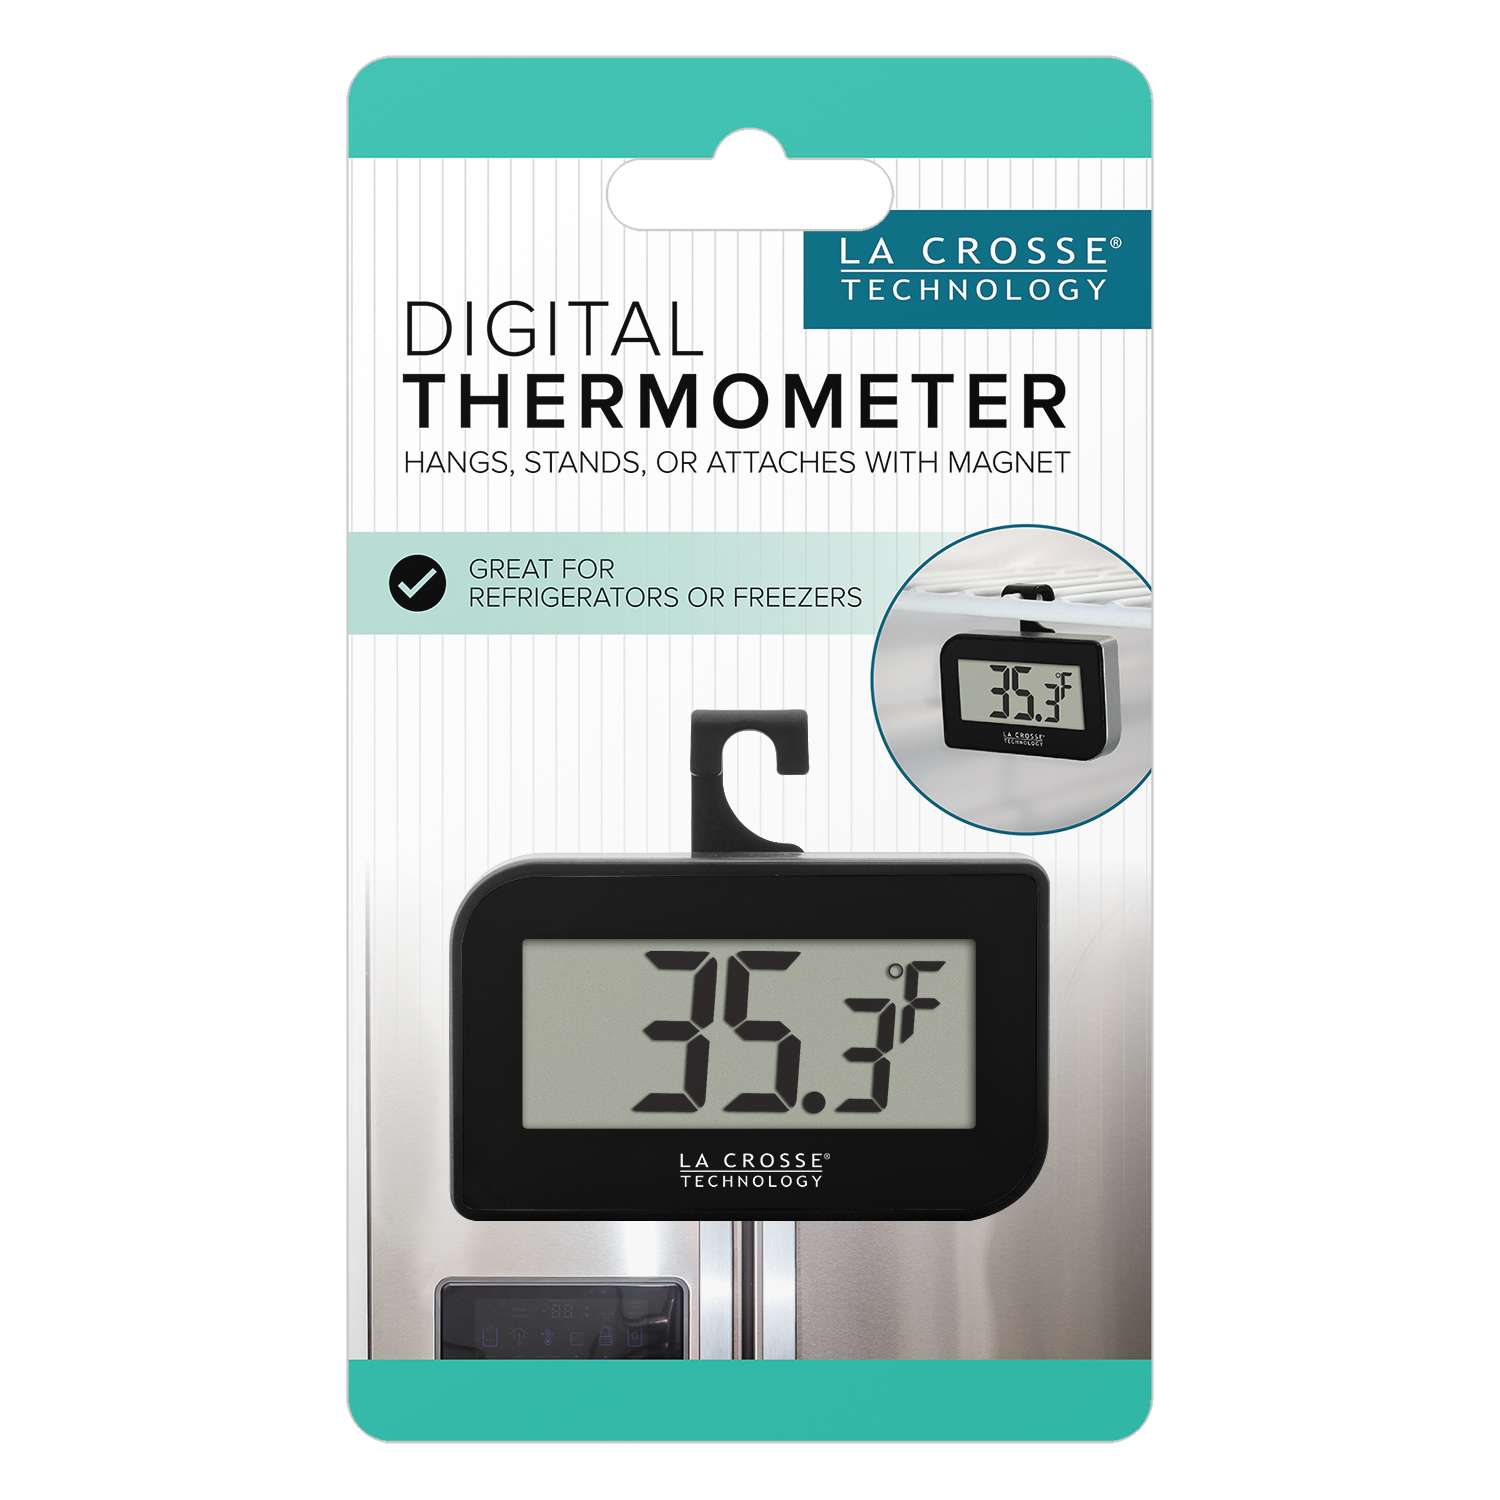 La Crosse Technology Digital Window Outdoor Thermometer with